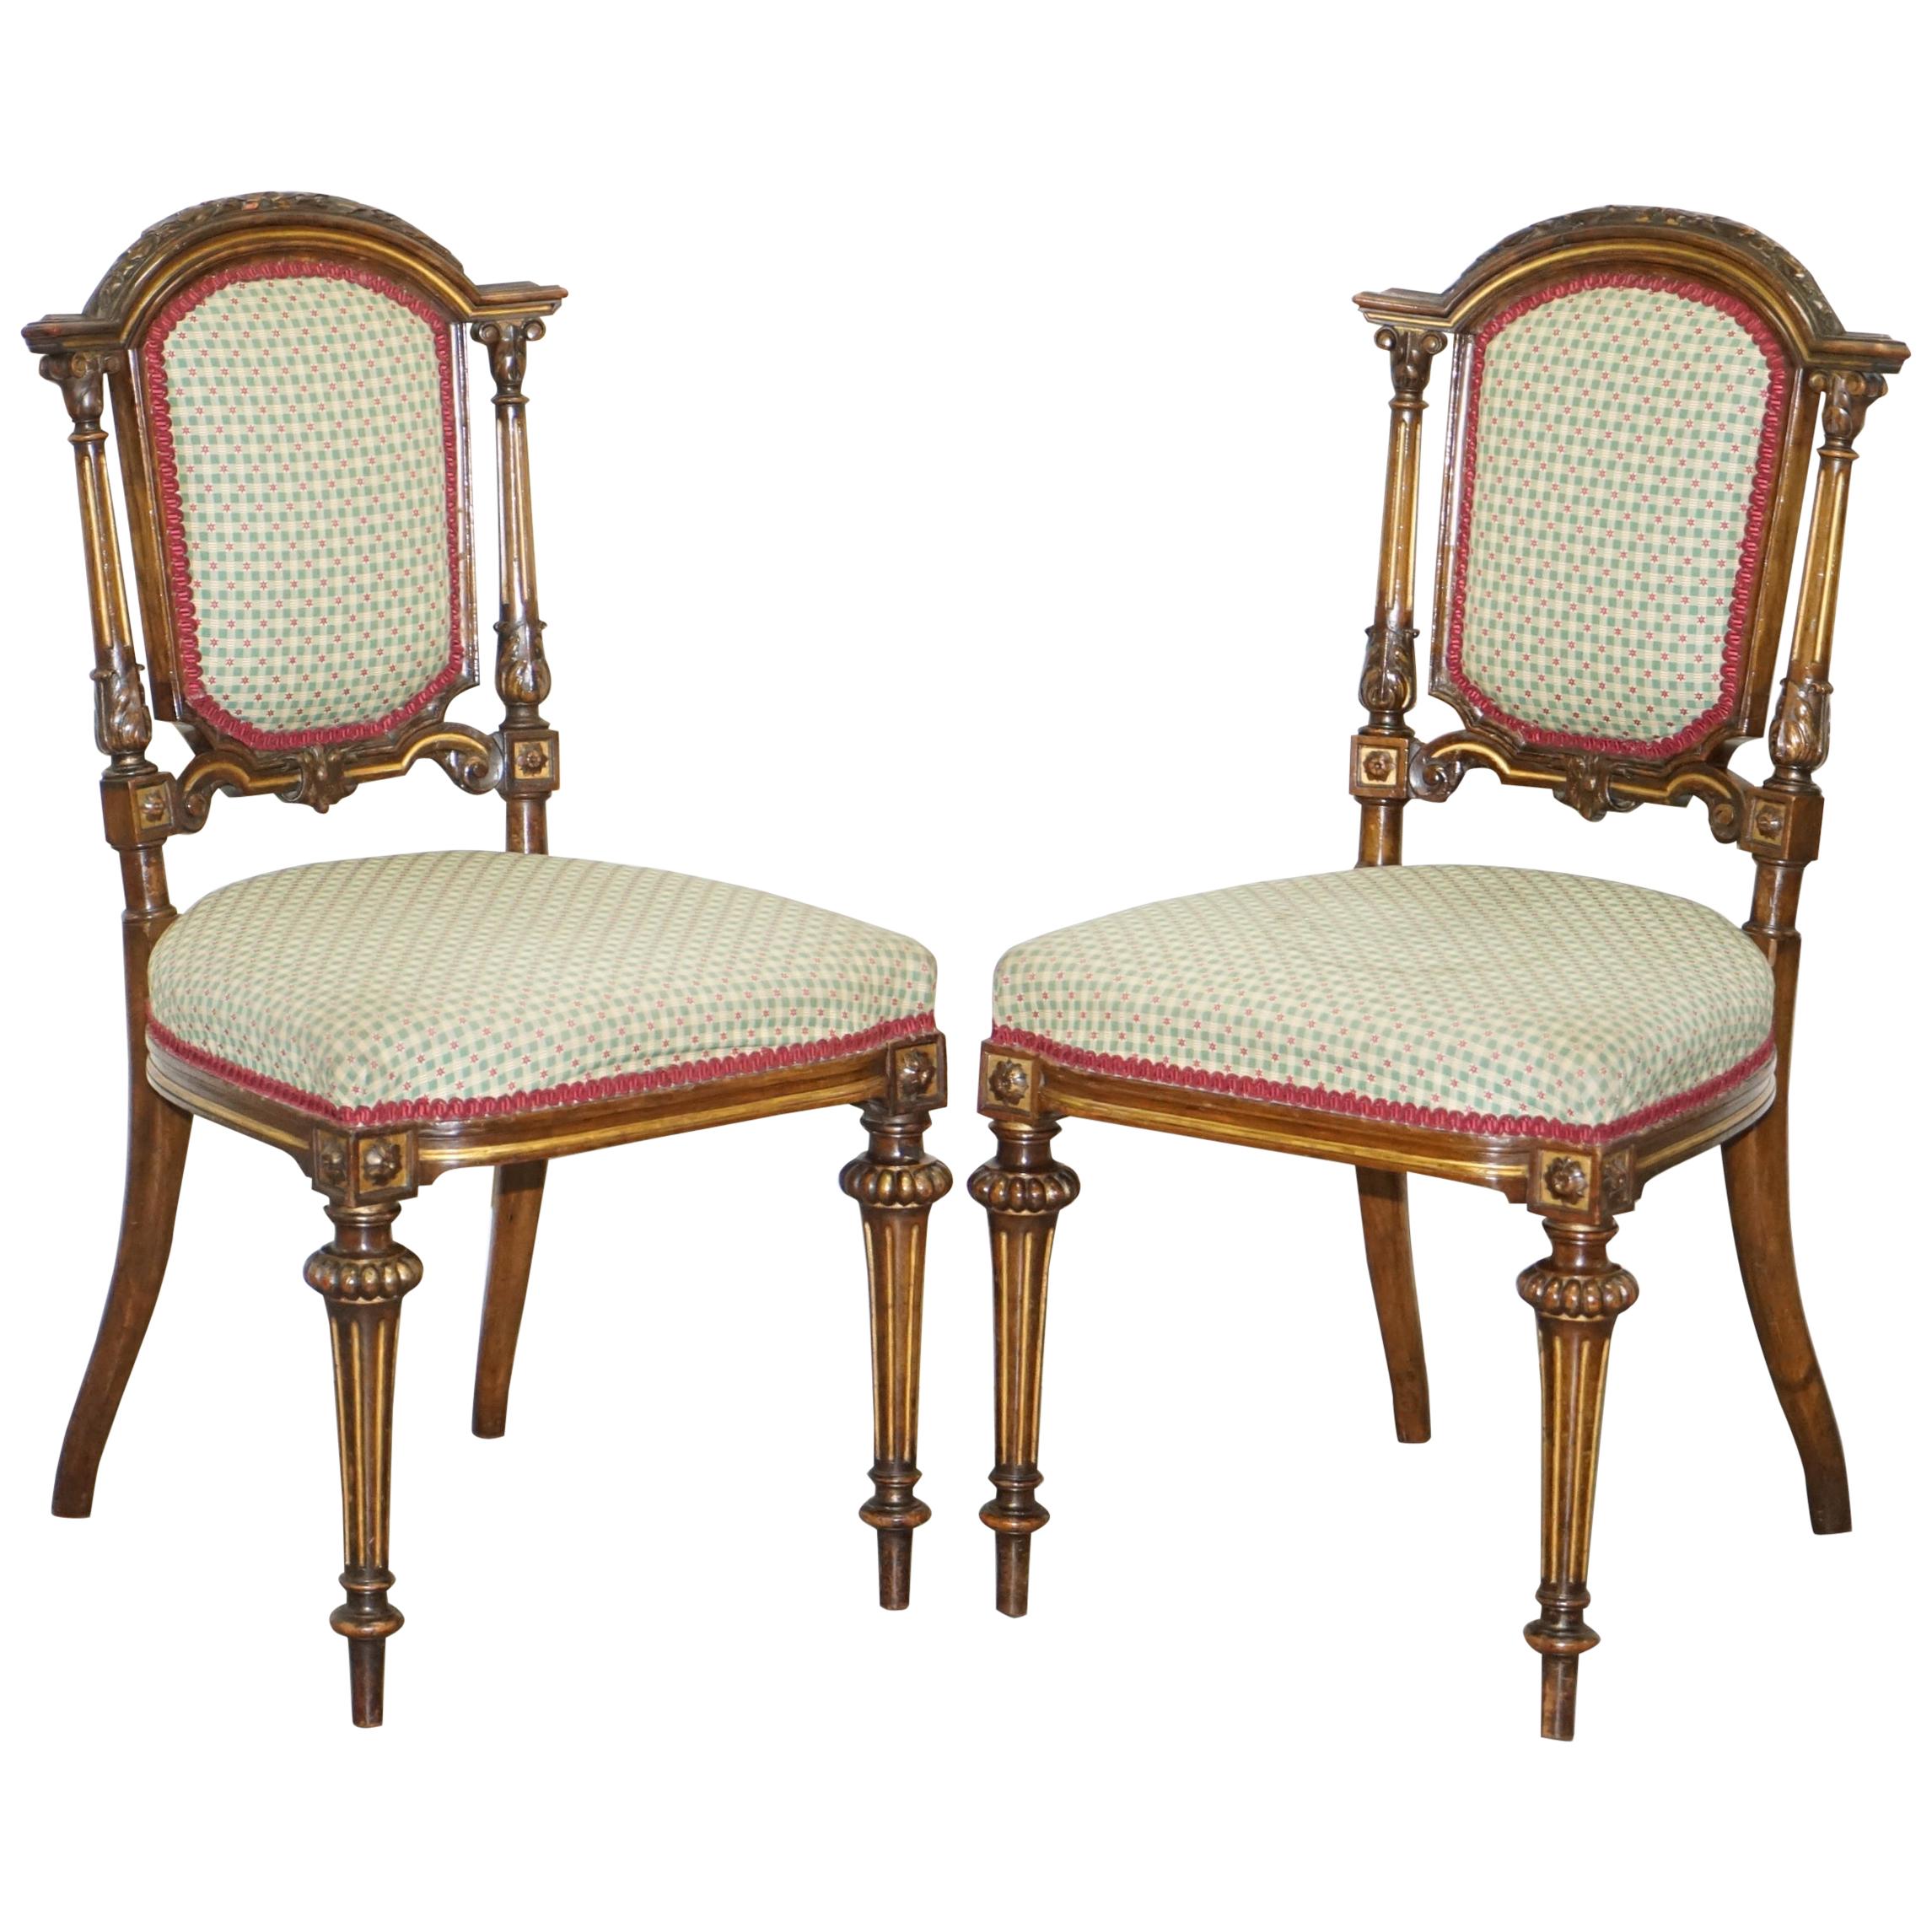 Pair of Victorian Walnut Giltwood Side Hall Chairs with Lovely Carved Frames